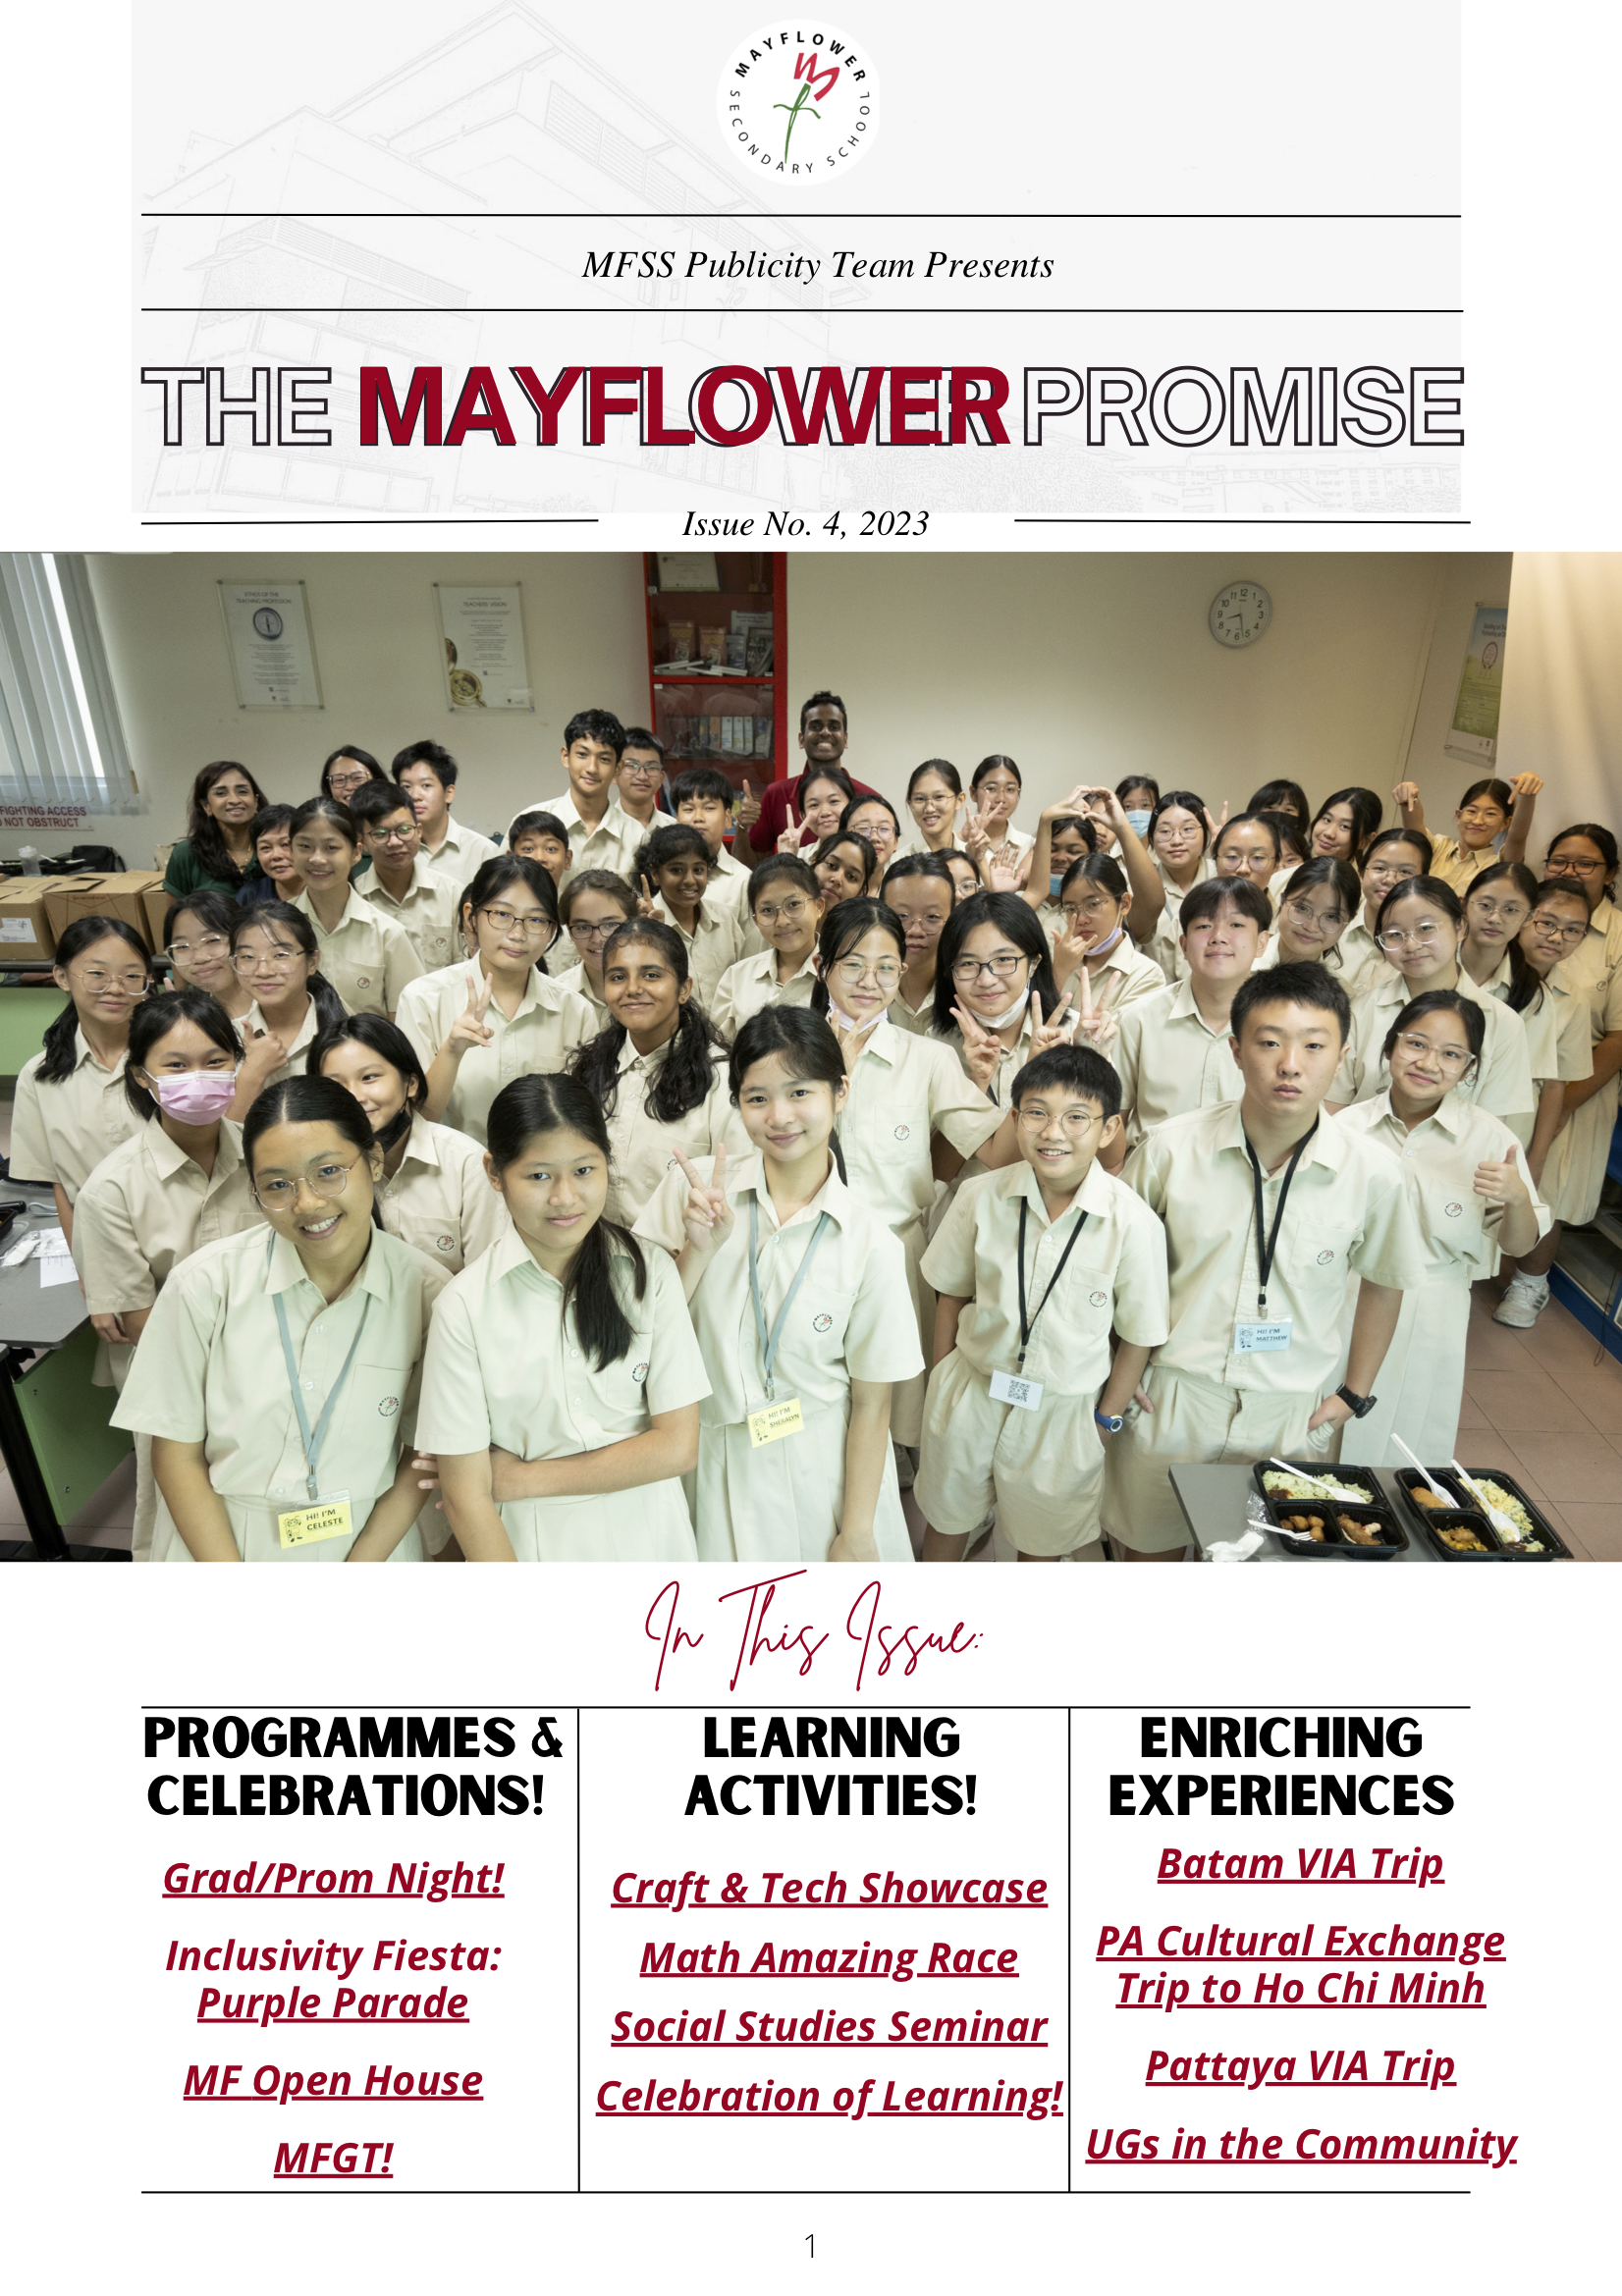 The Mayflower Promise (Issue 4, 2023)